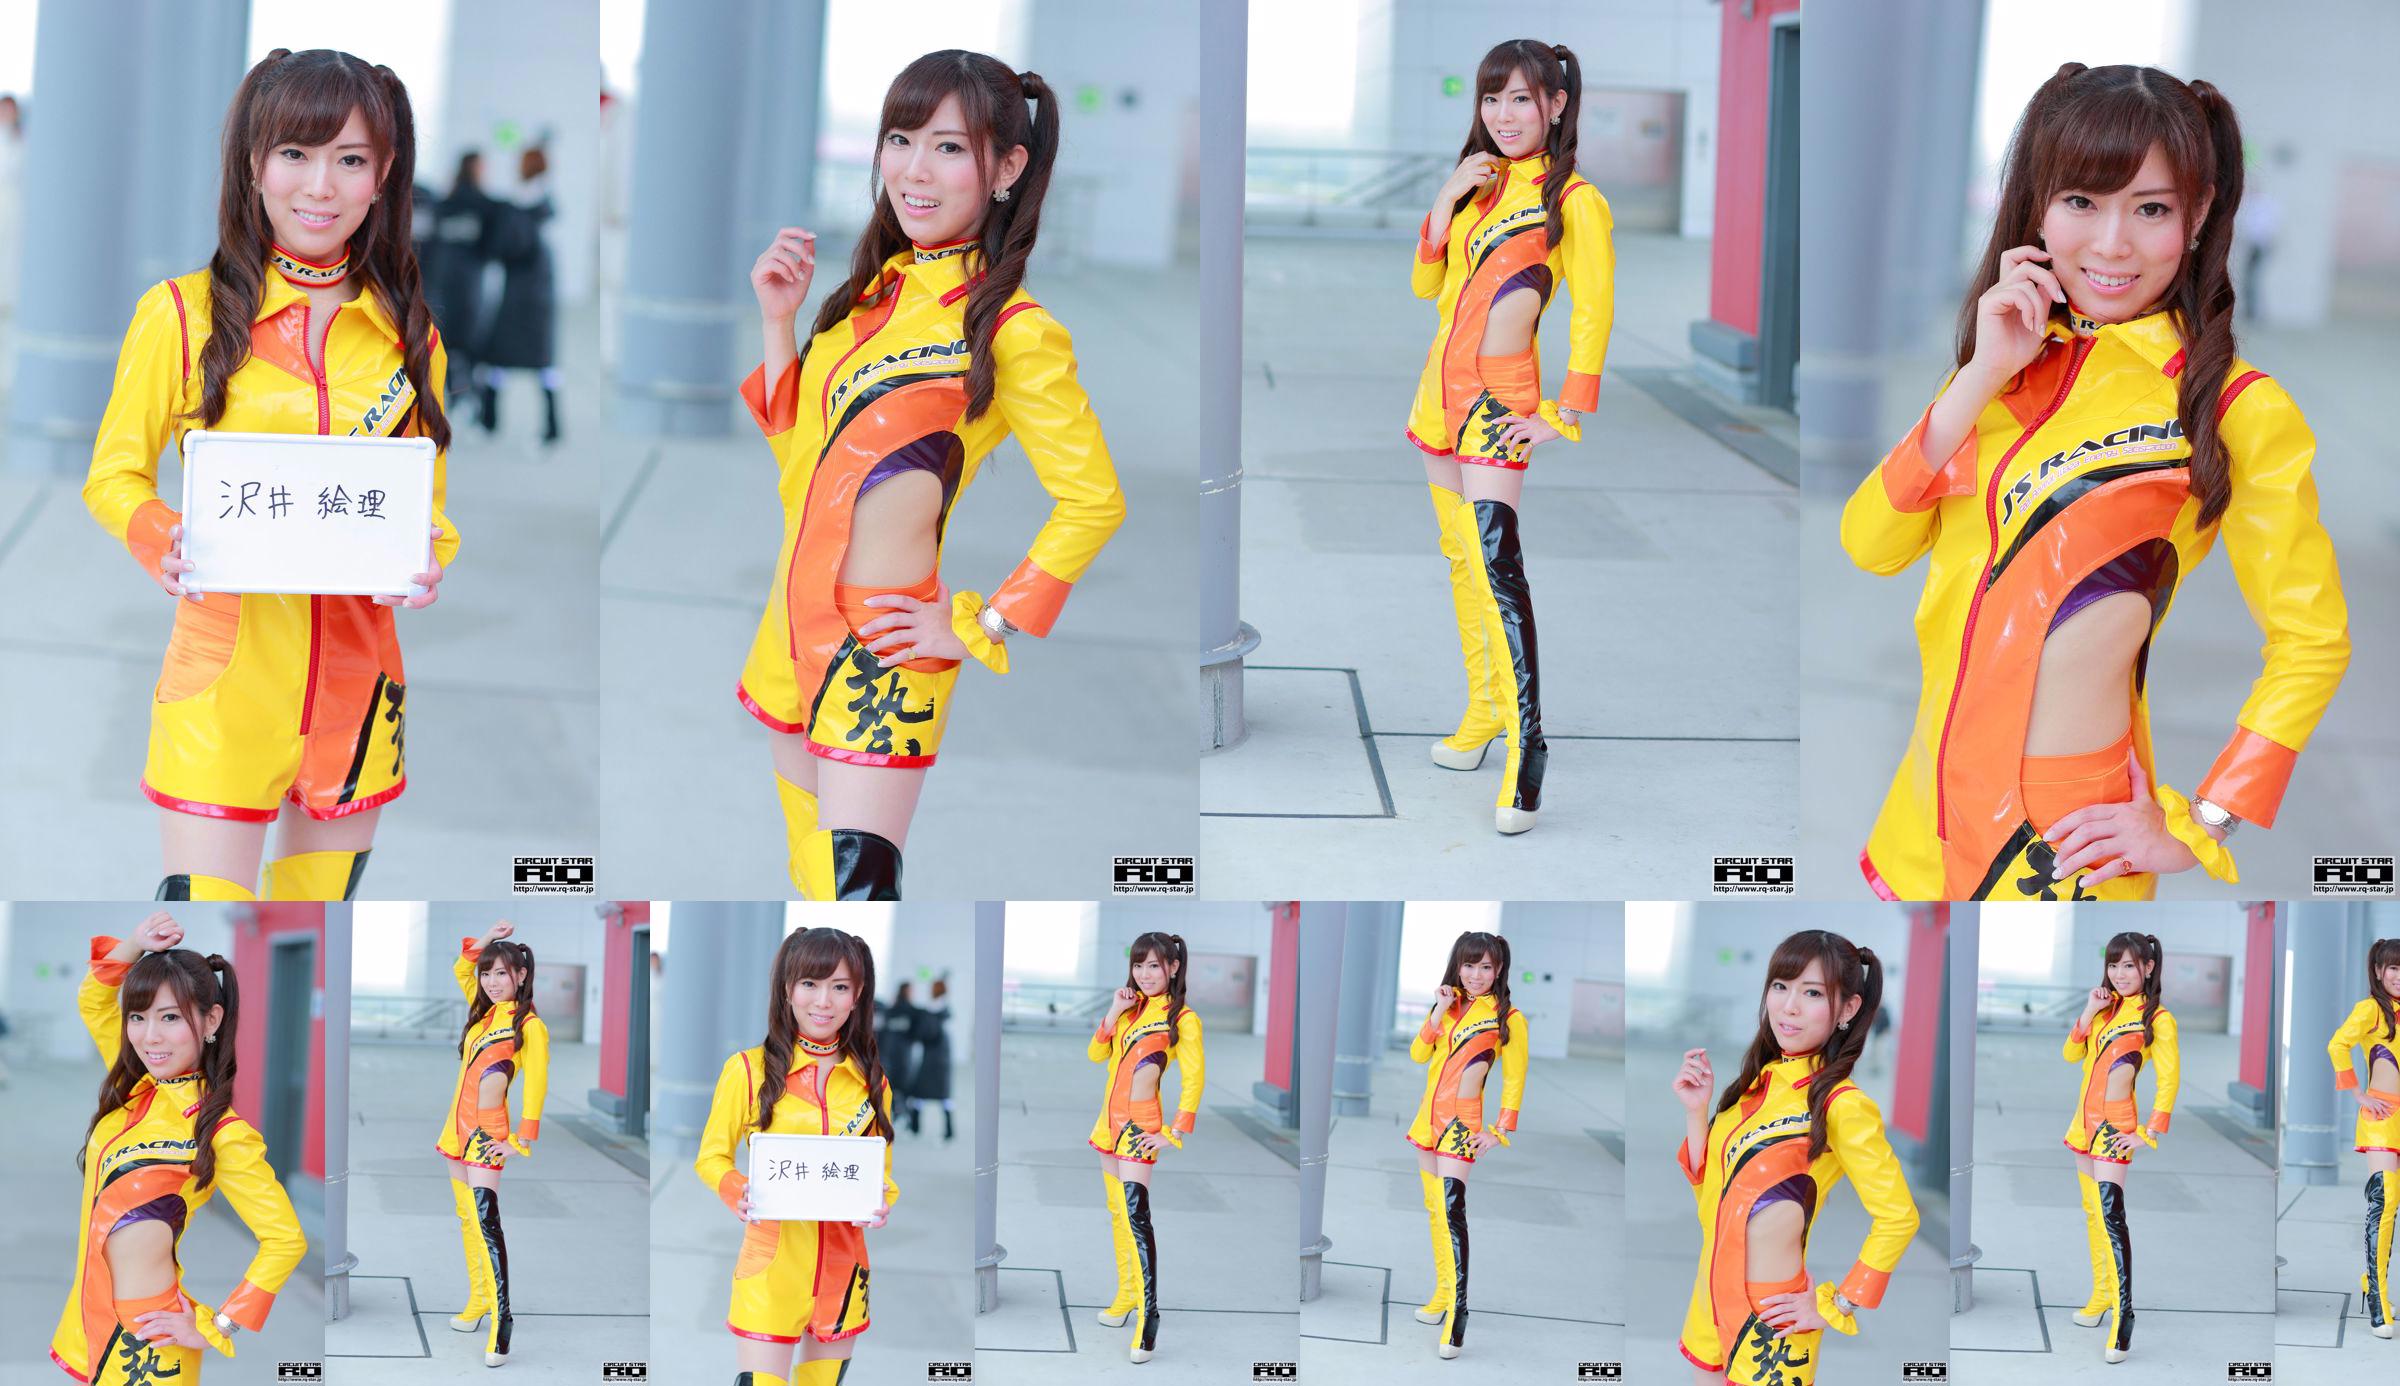 [RQ-STAR] NO.00742 Chihiro Ando Race Queen Race Queen No.f997b7 Page 2